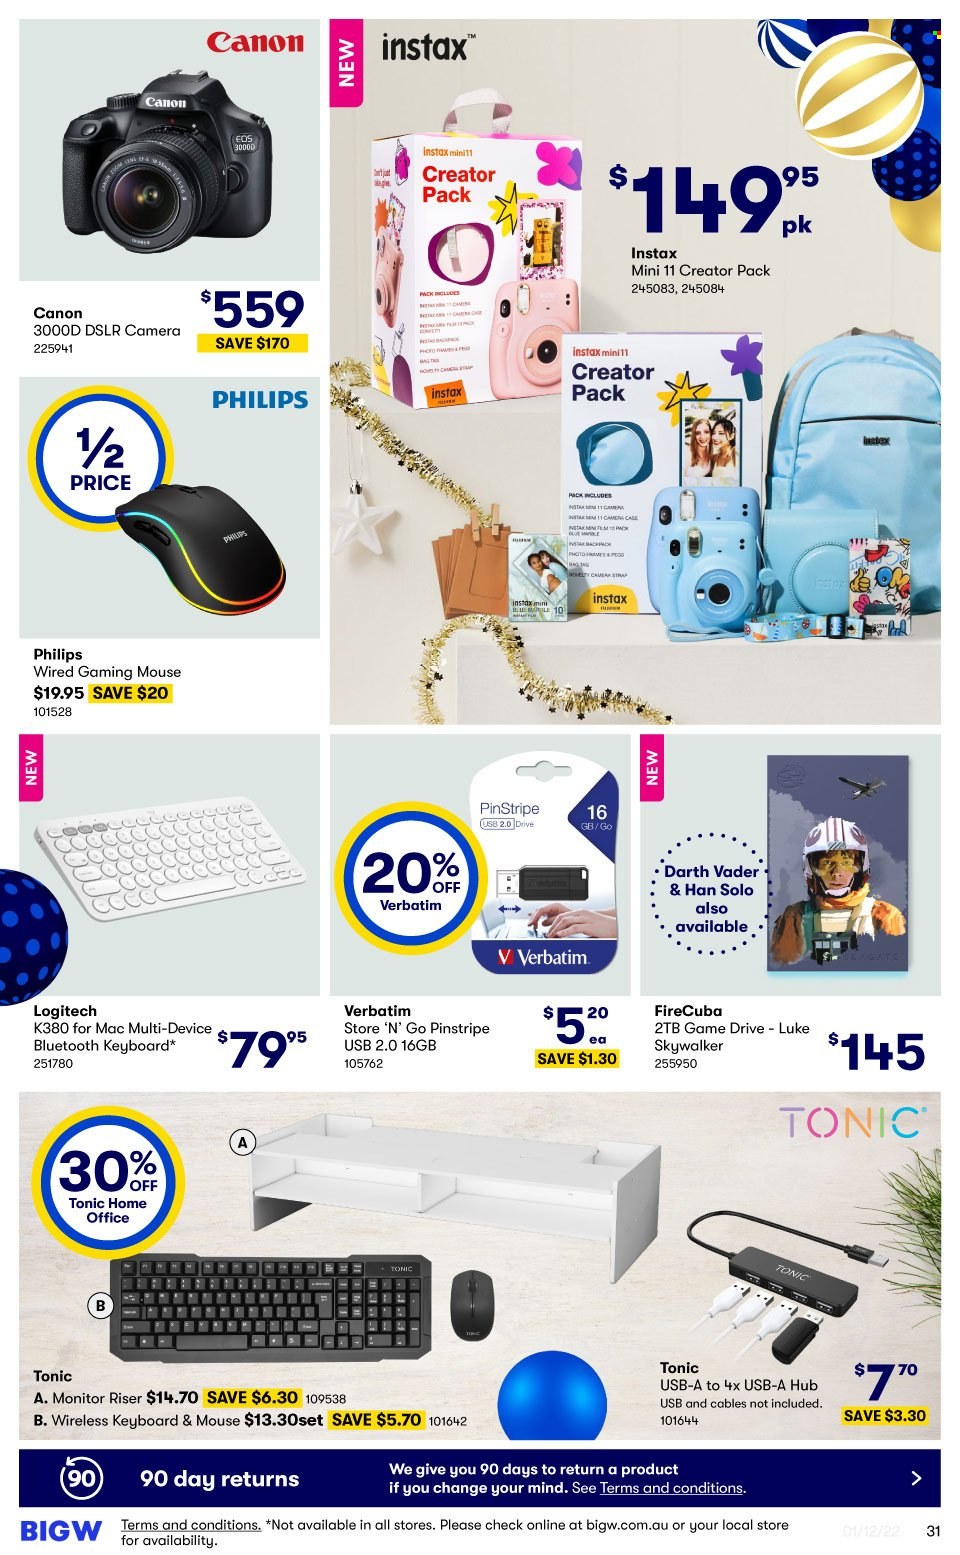 thumbnail - BIG W Catalogue - Sales products - gaming mouse, Philips, tonic, keyboard, mouse, Logitech, monitor, Canon, DSLR camera, camera. Page 31.